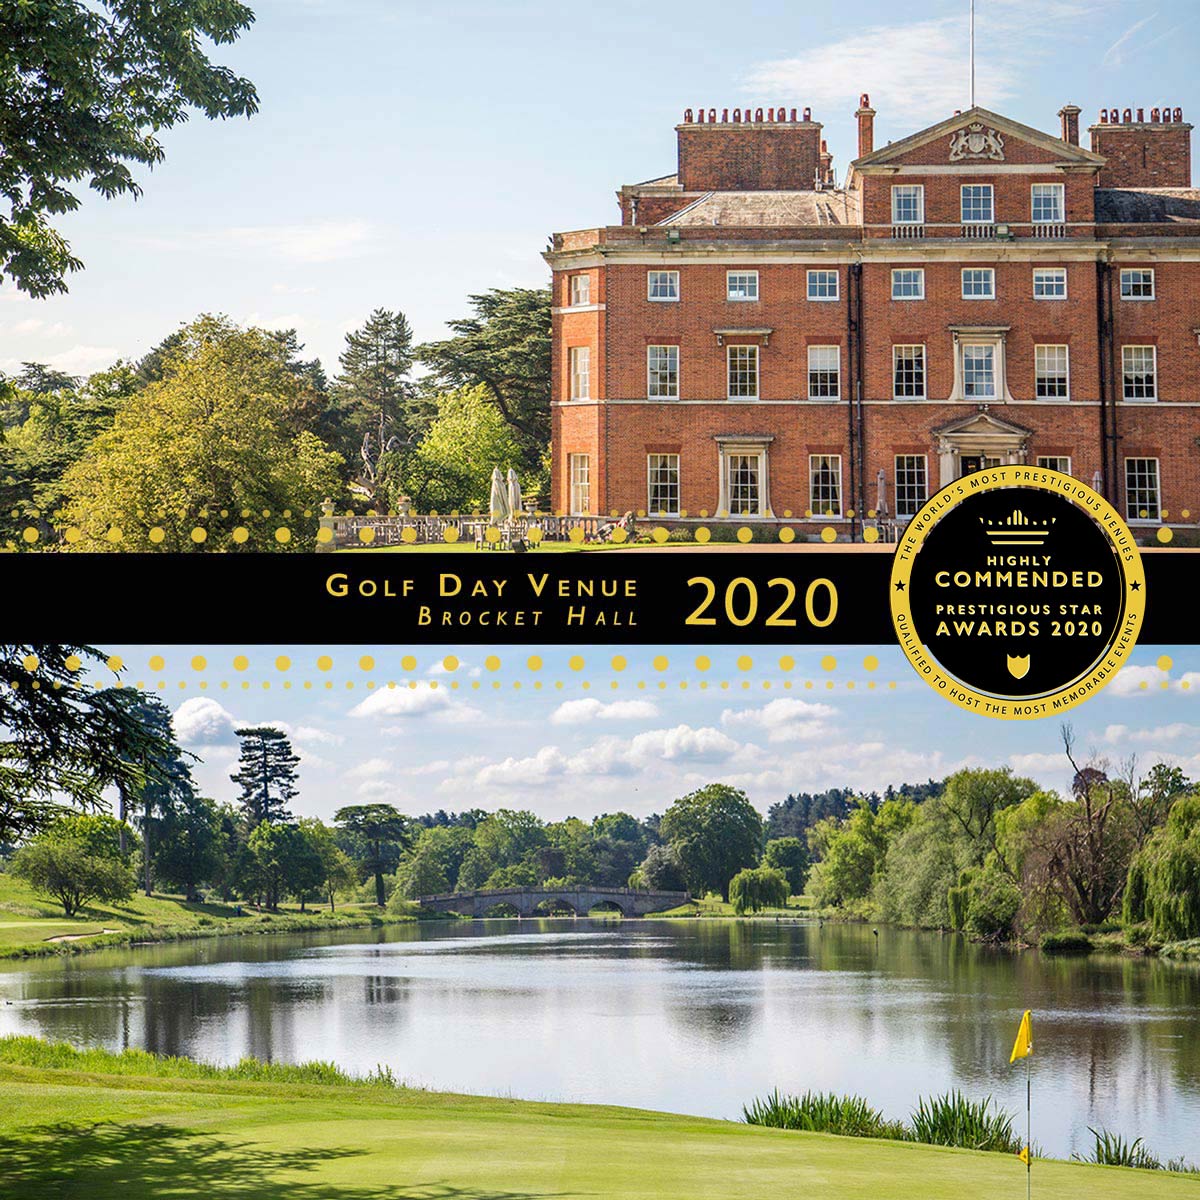 The Melbourne Club at Brocket Hall